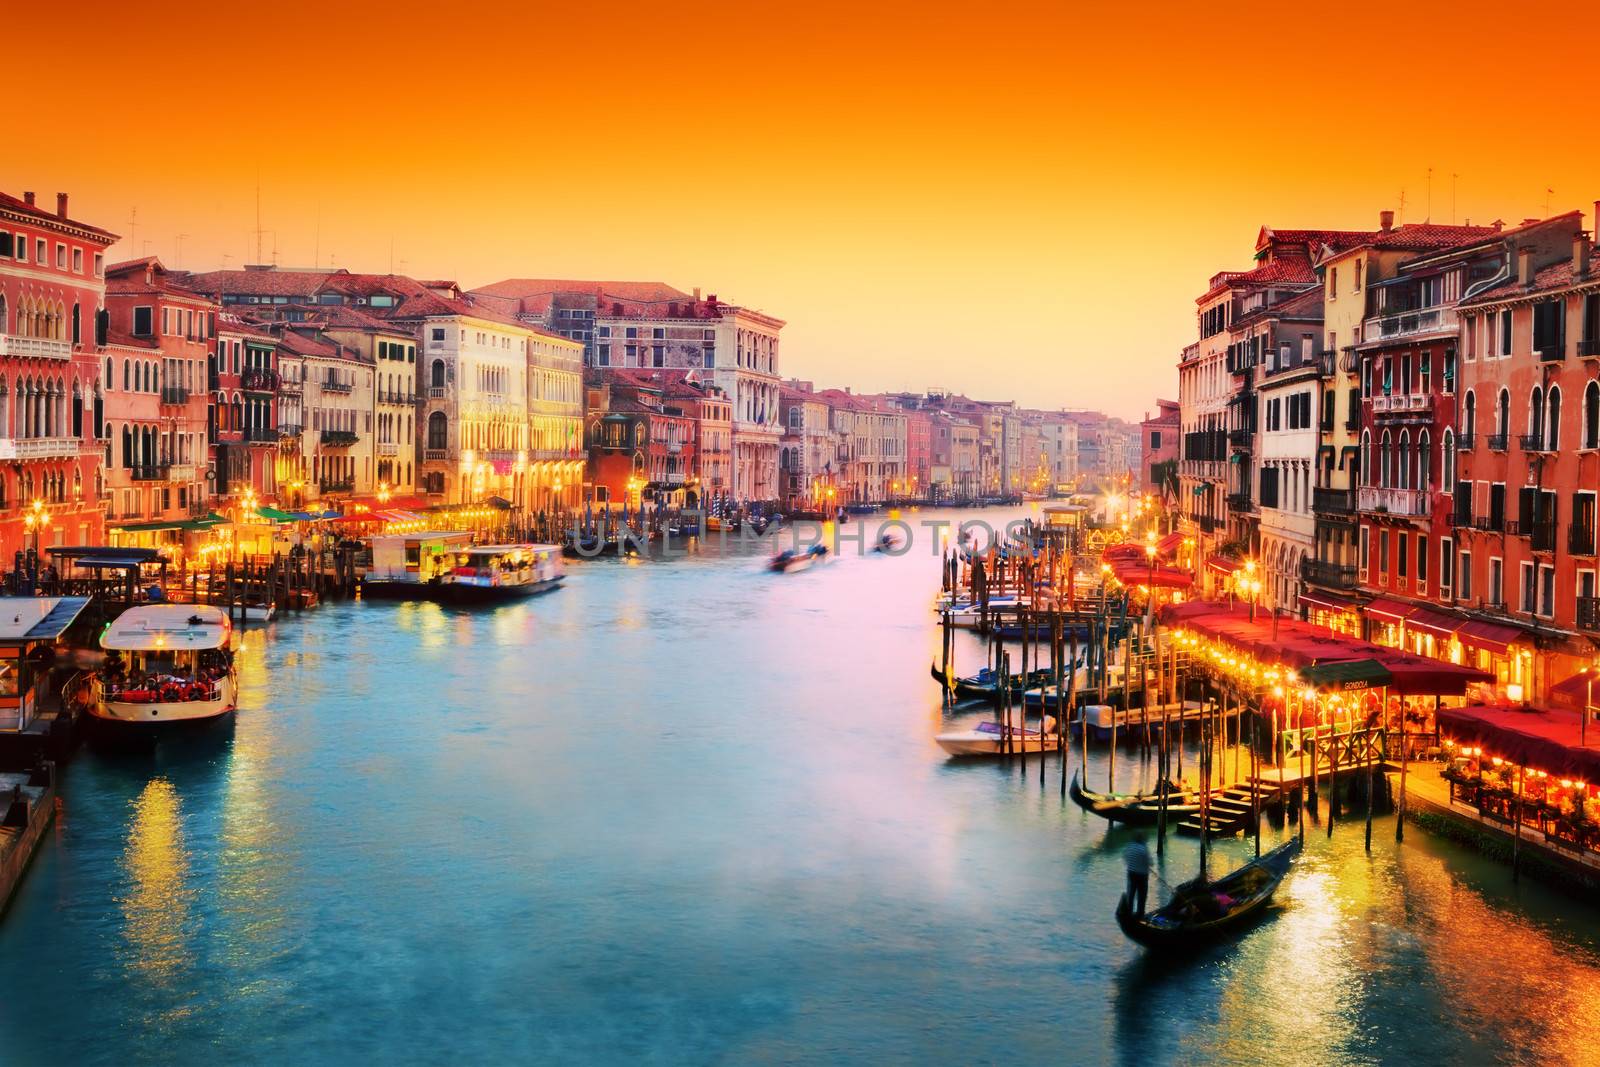 Venice, Italy. Gondola floats on Grand Canal at sunset by photocreo